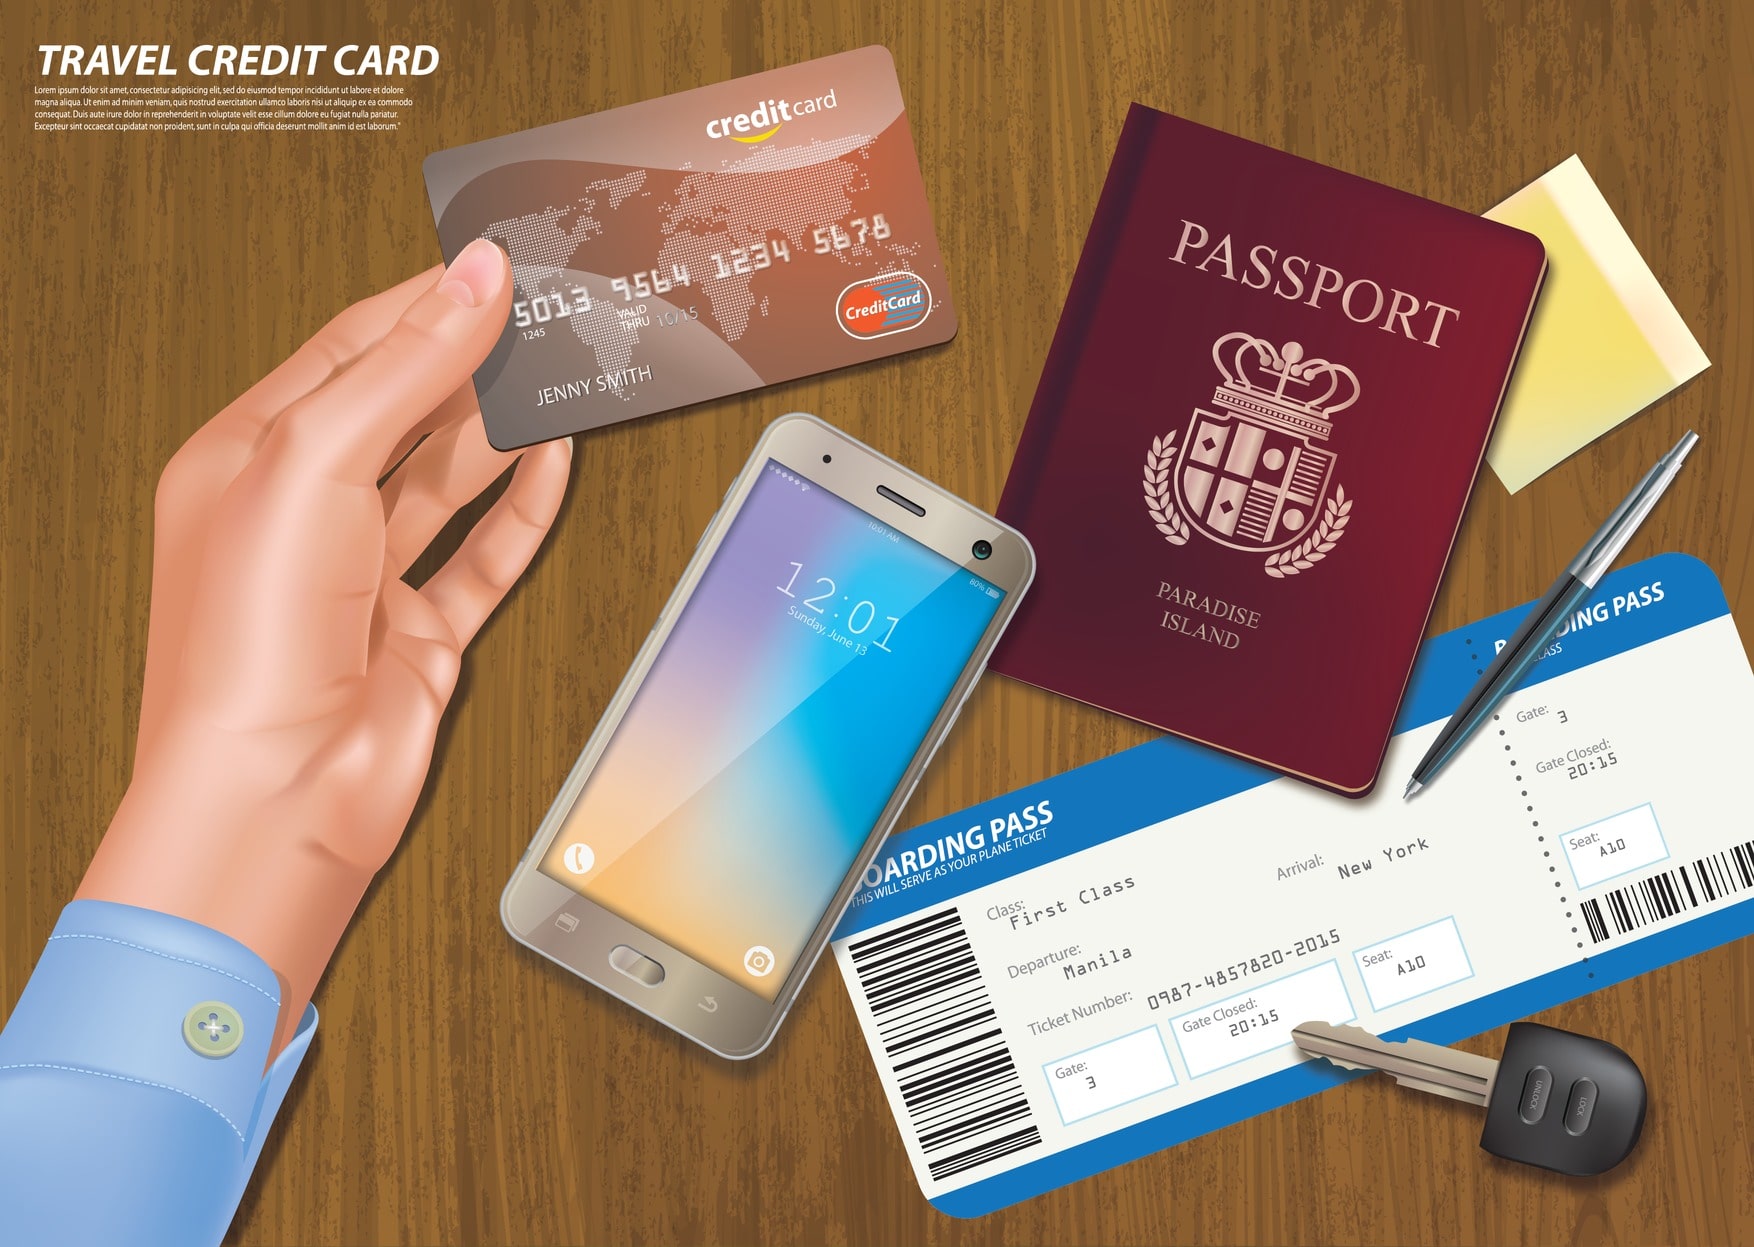 Frequent Flyer number. Frequent Flyer слот. Travel credit Card. Нож frequent Flyer.